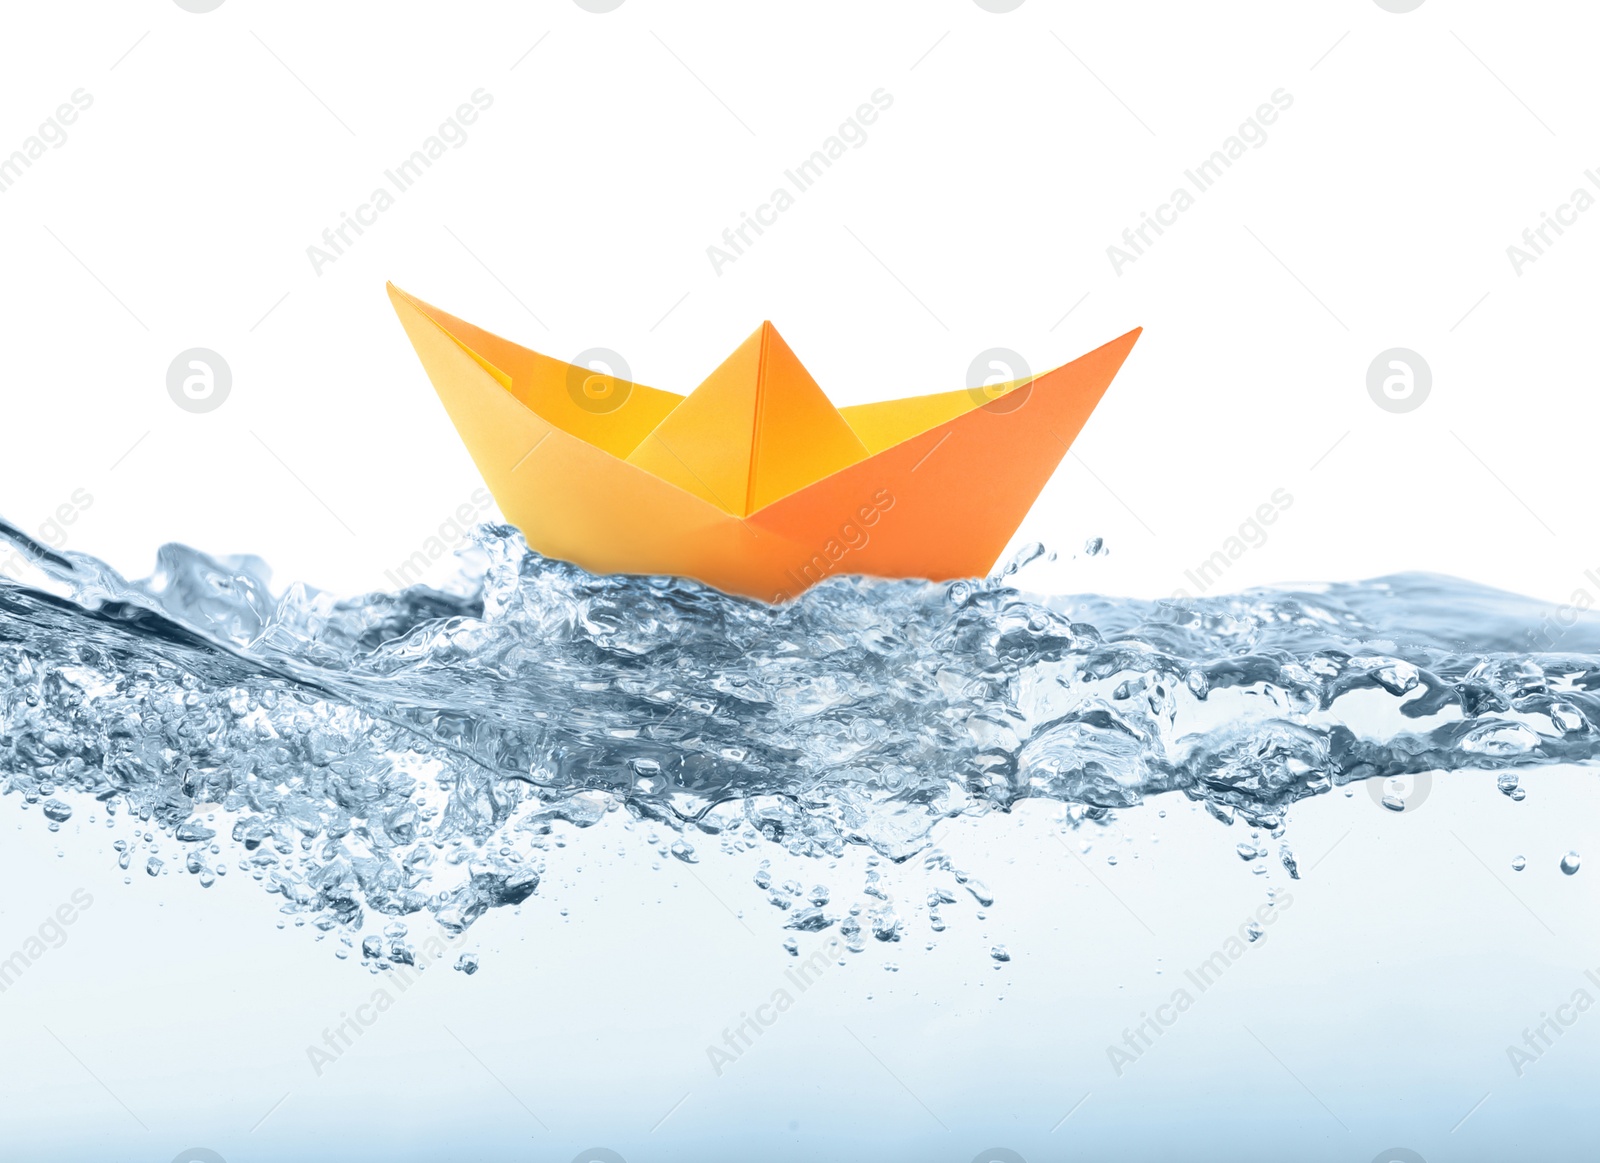 Image of Handmade orange paper boat floating on clear water against white background 